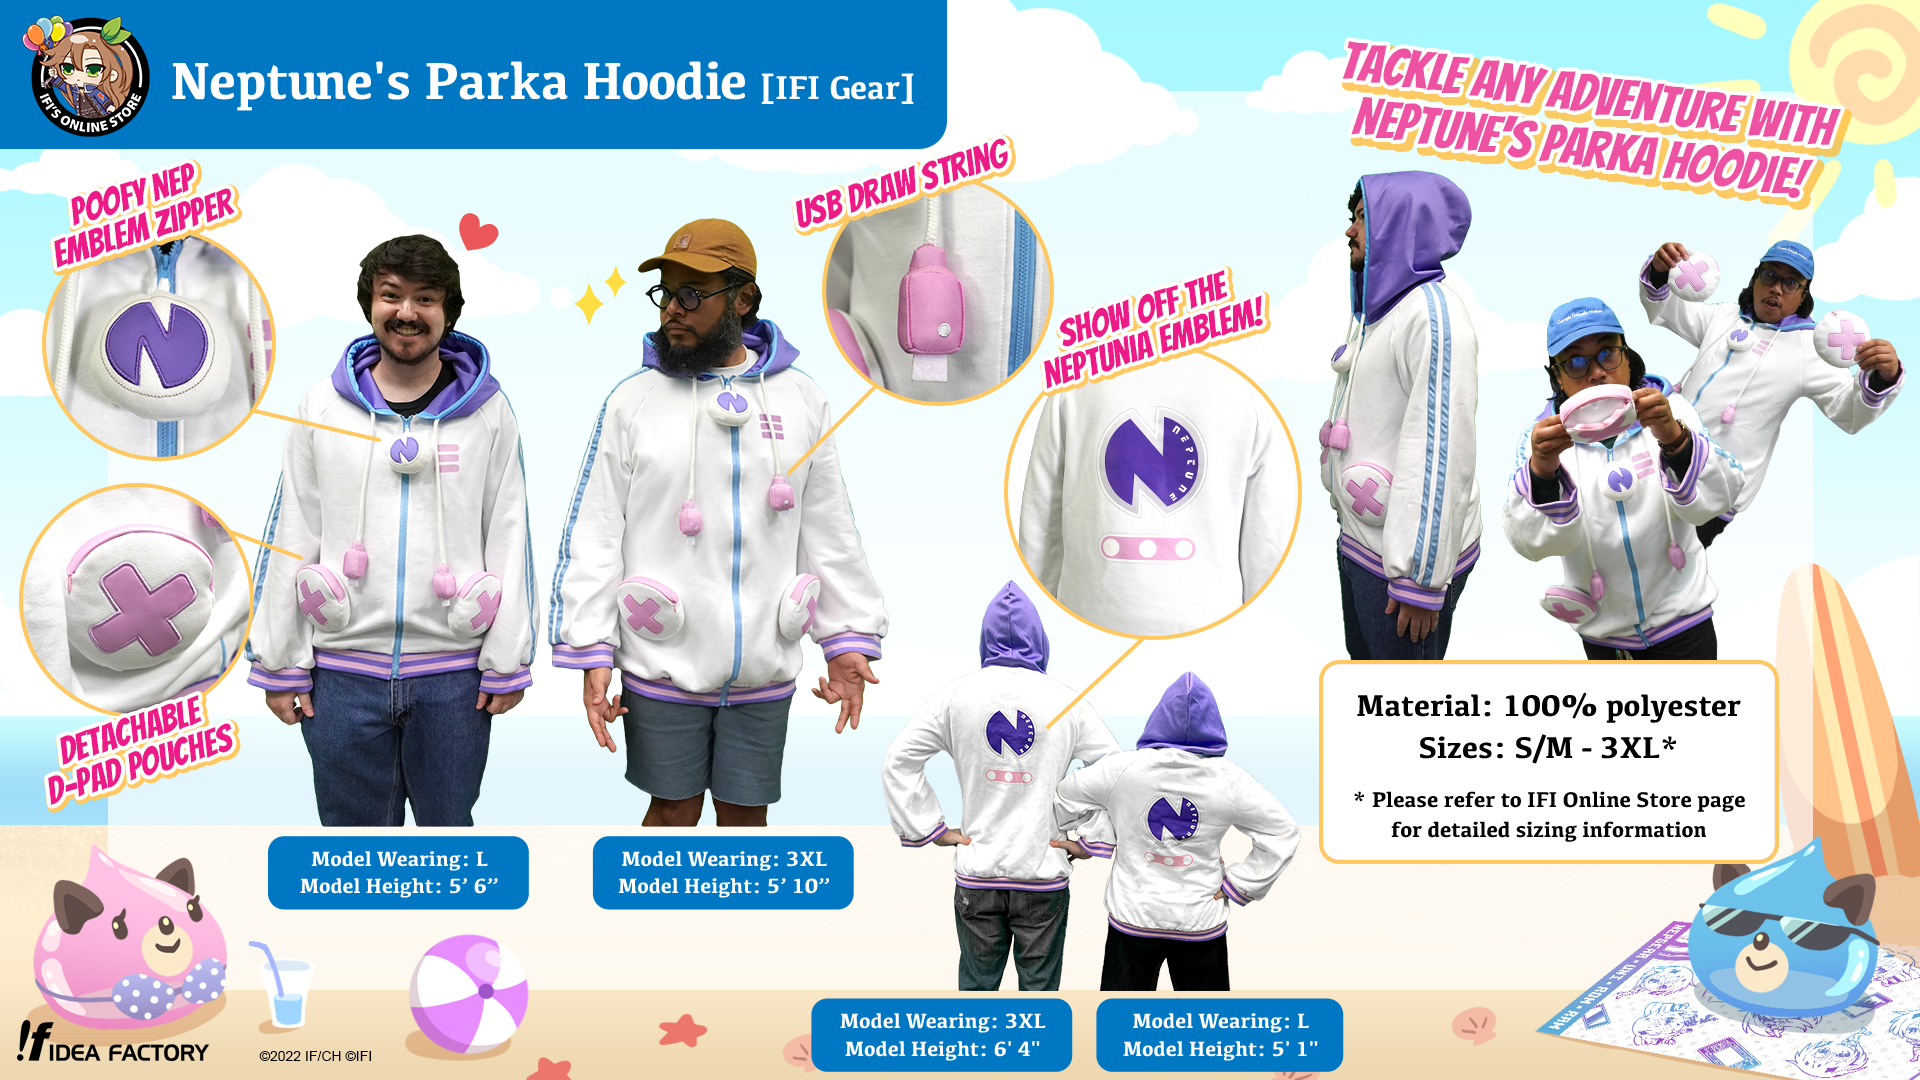 Neptune's Parka Hoodie [IFI Gear] - SOLD OUT!